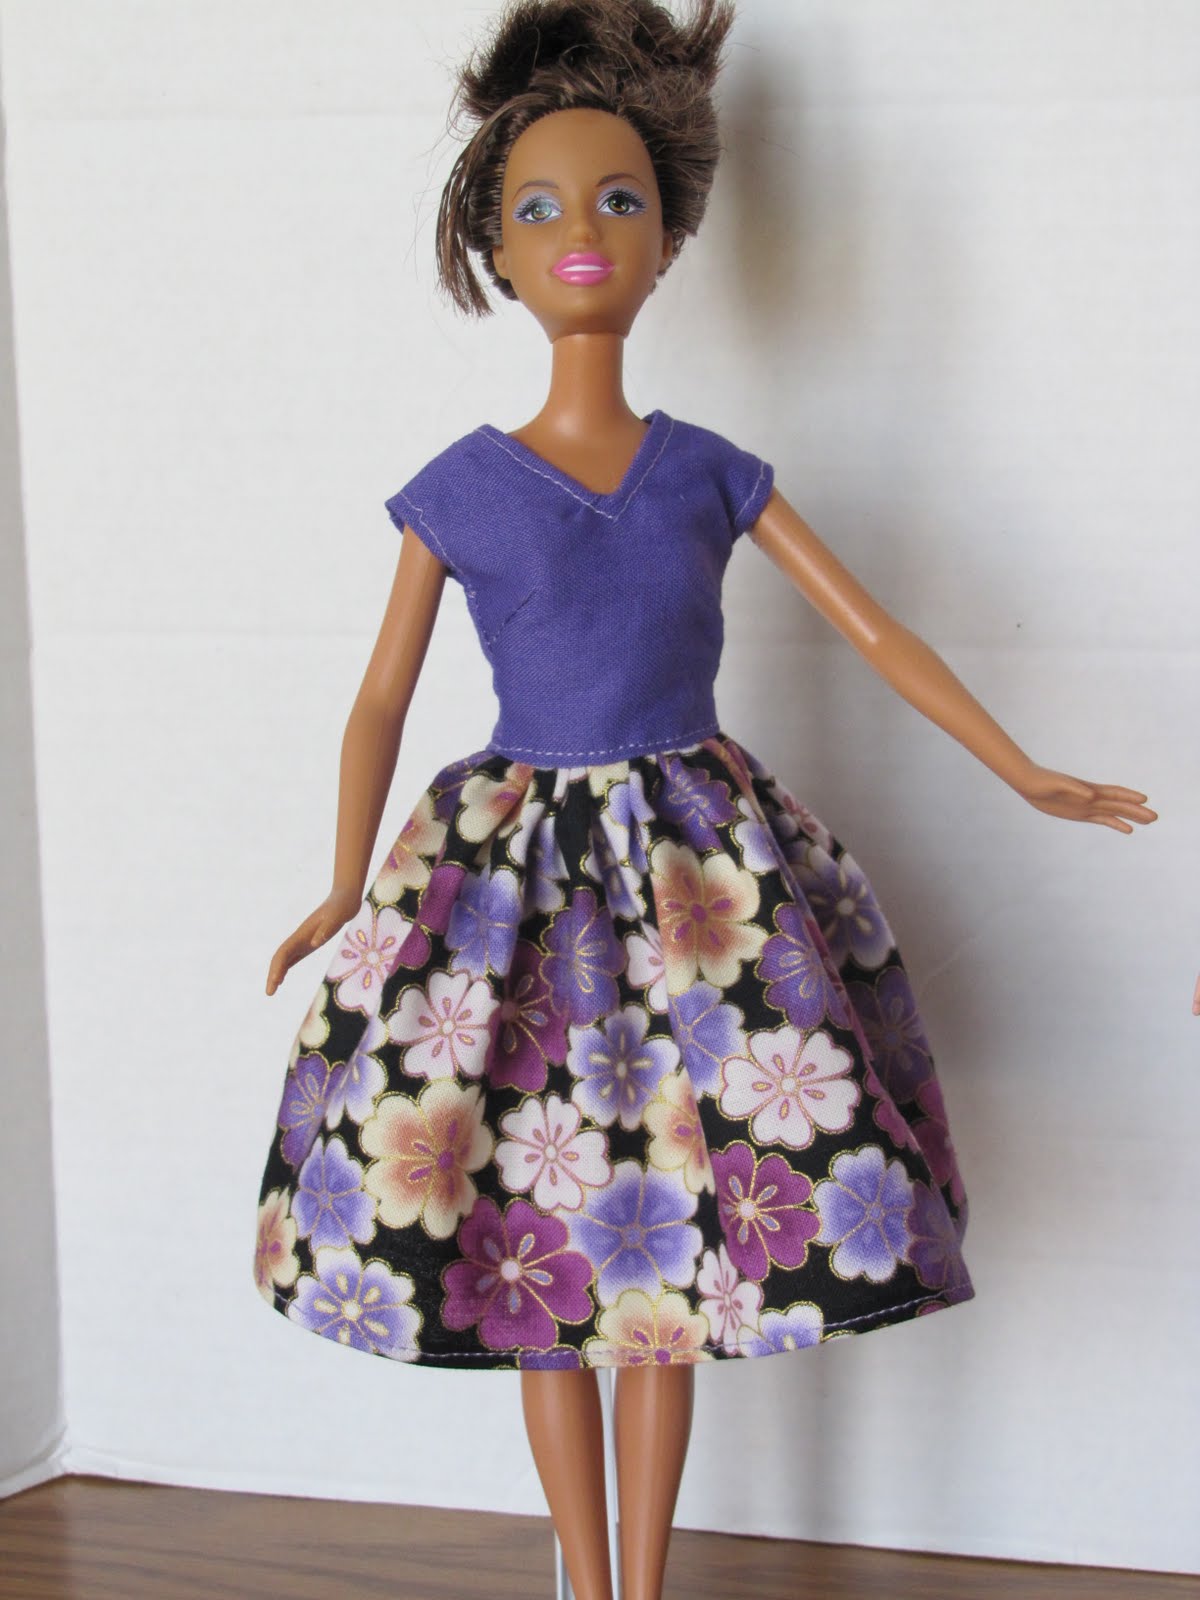 Modest Barbie Style: August 2010